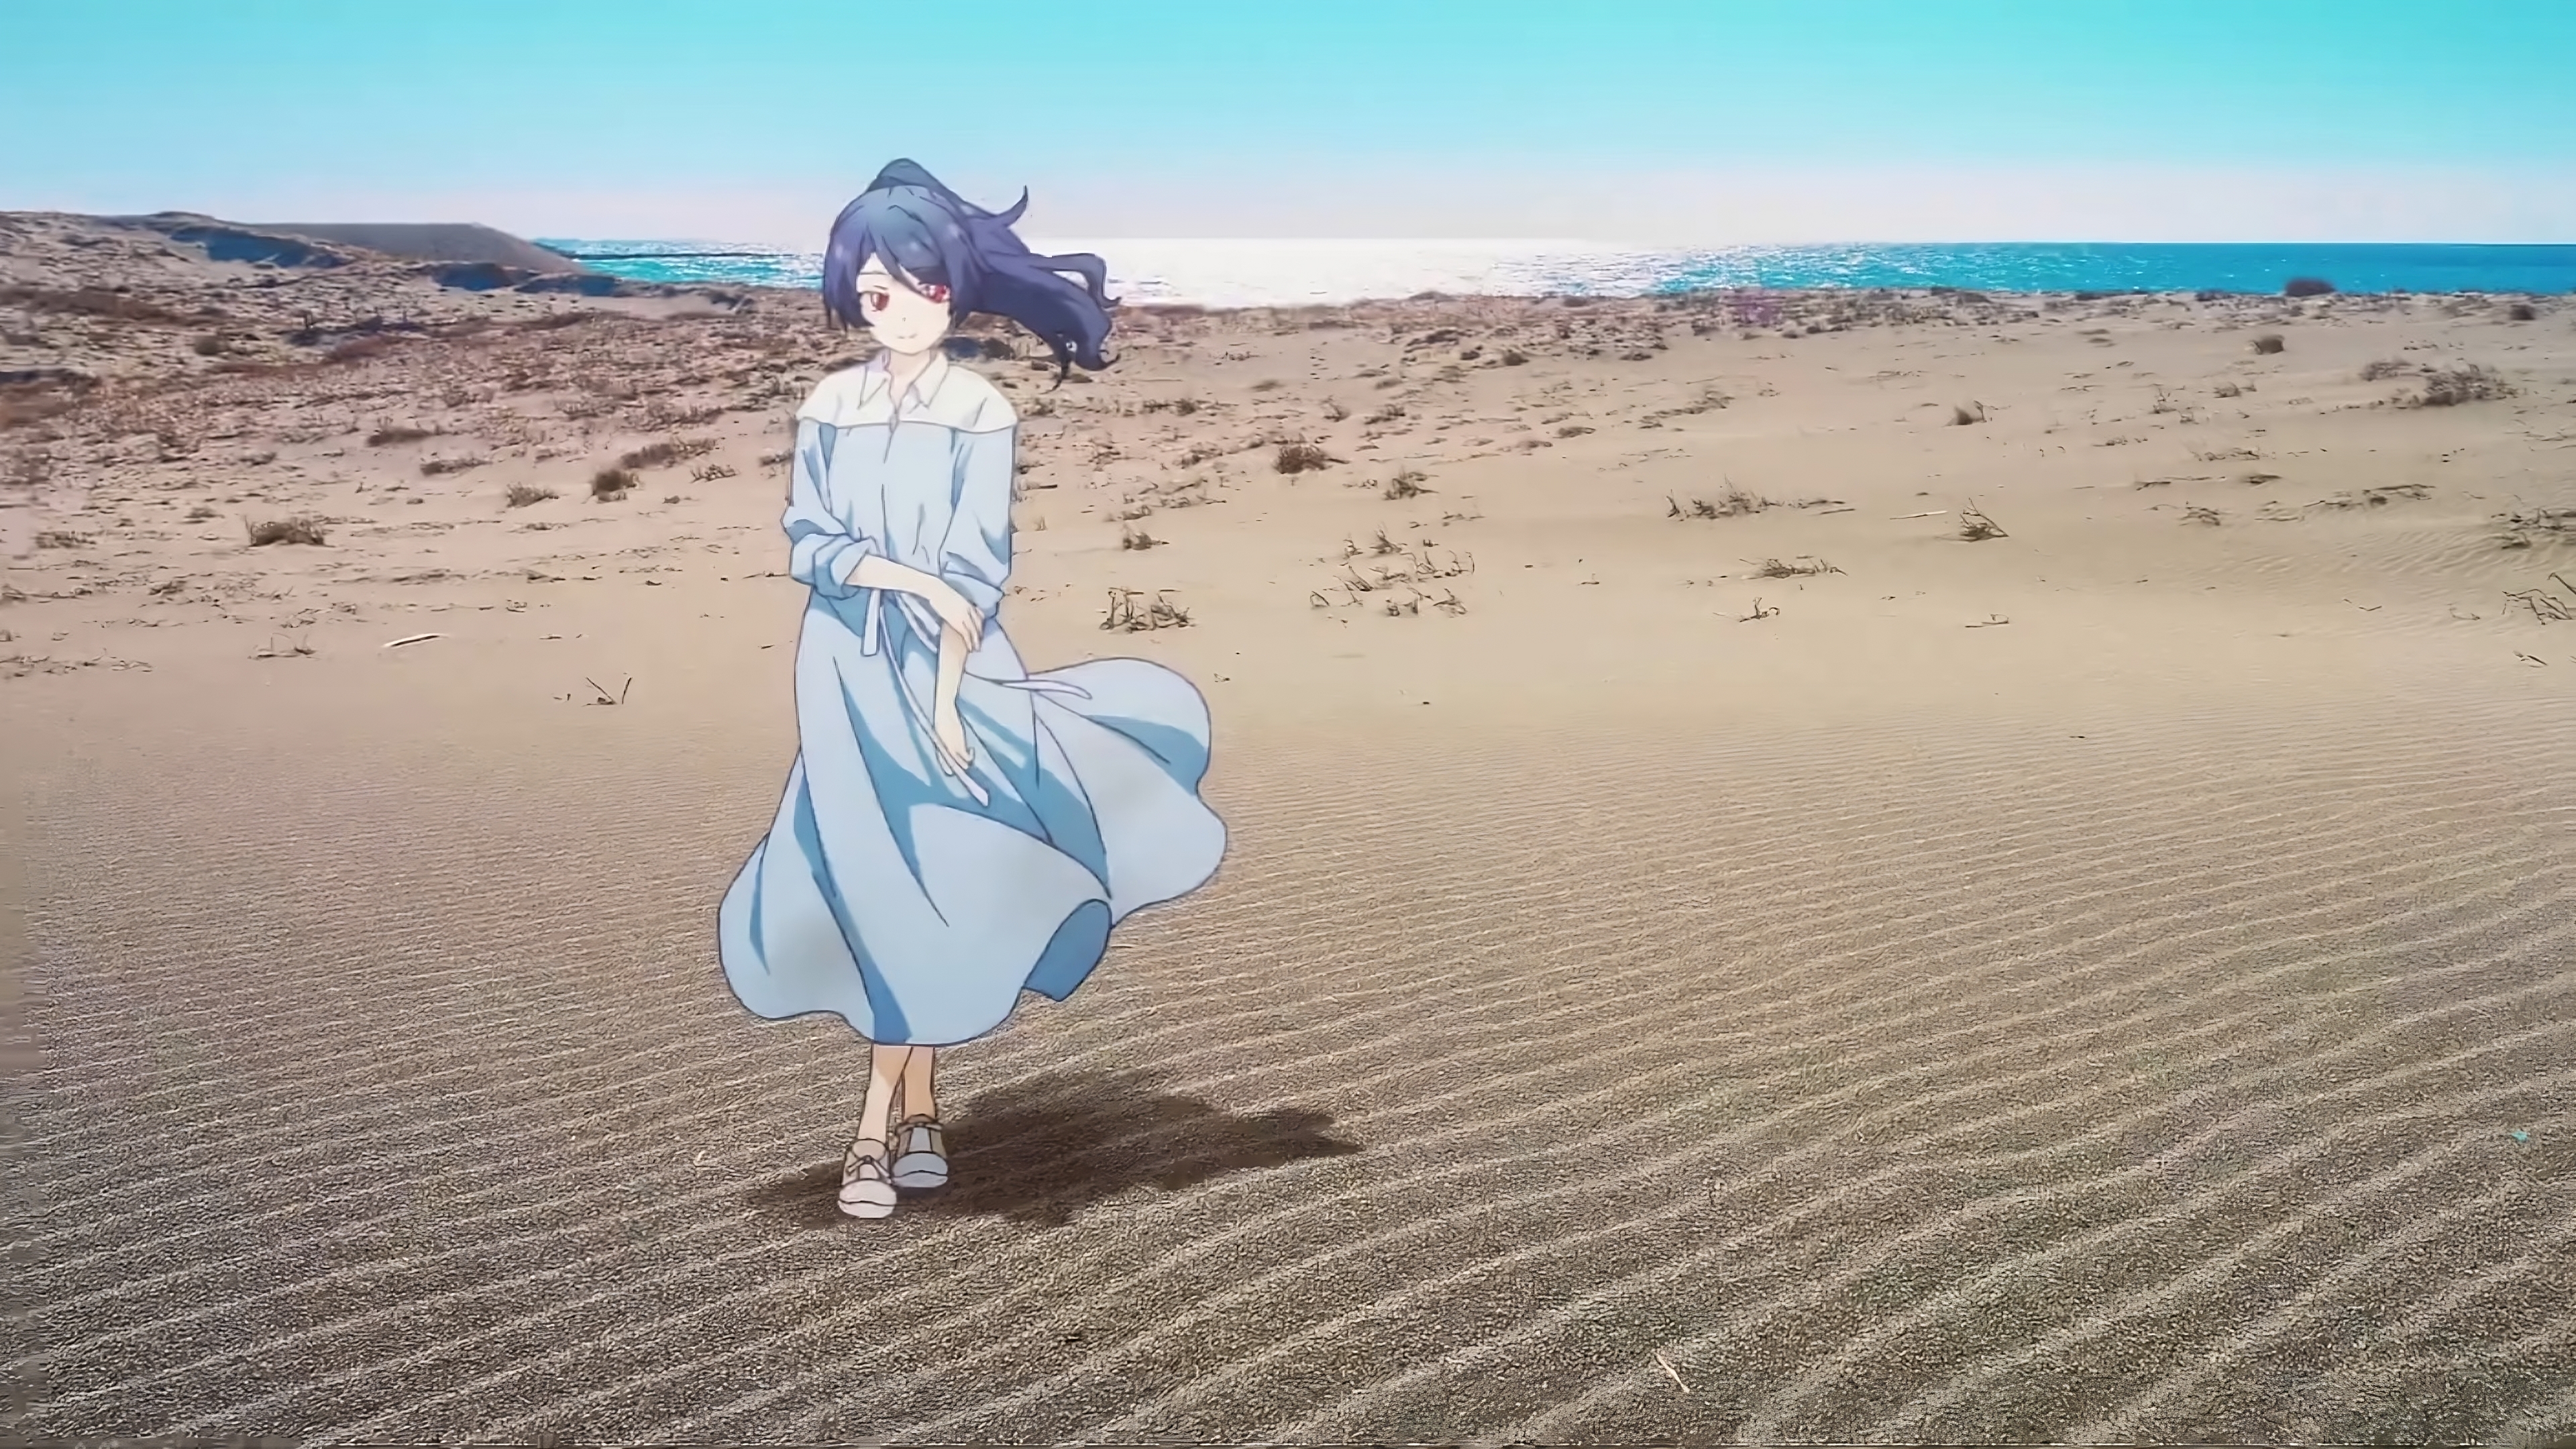 Anime 3840x2160 The Dreaming Boy is a Realist anime anime girls Anime screenshot long hair standing dress desert looking at viewer smiling animeirl